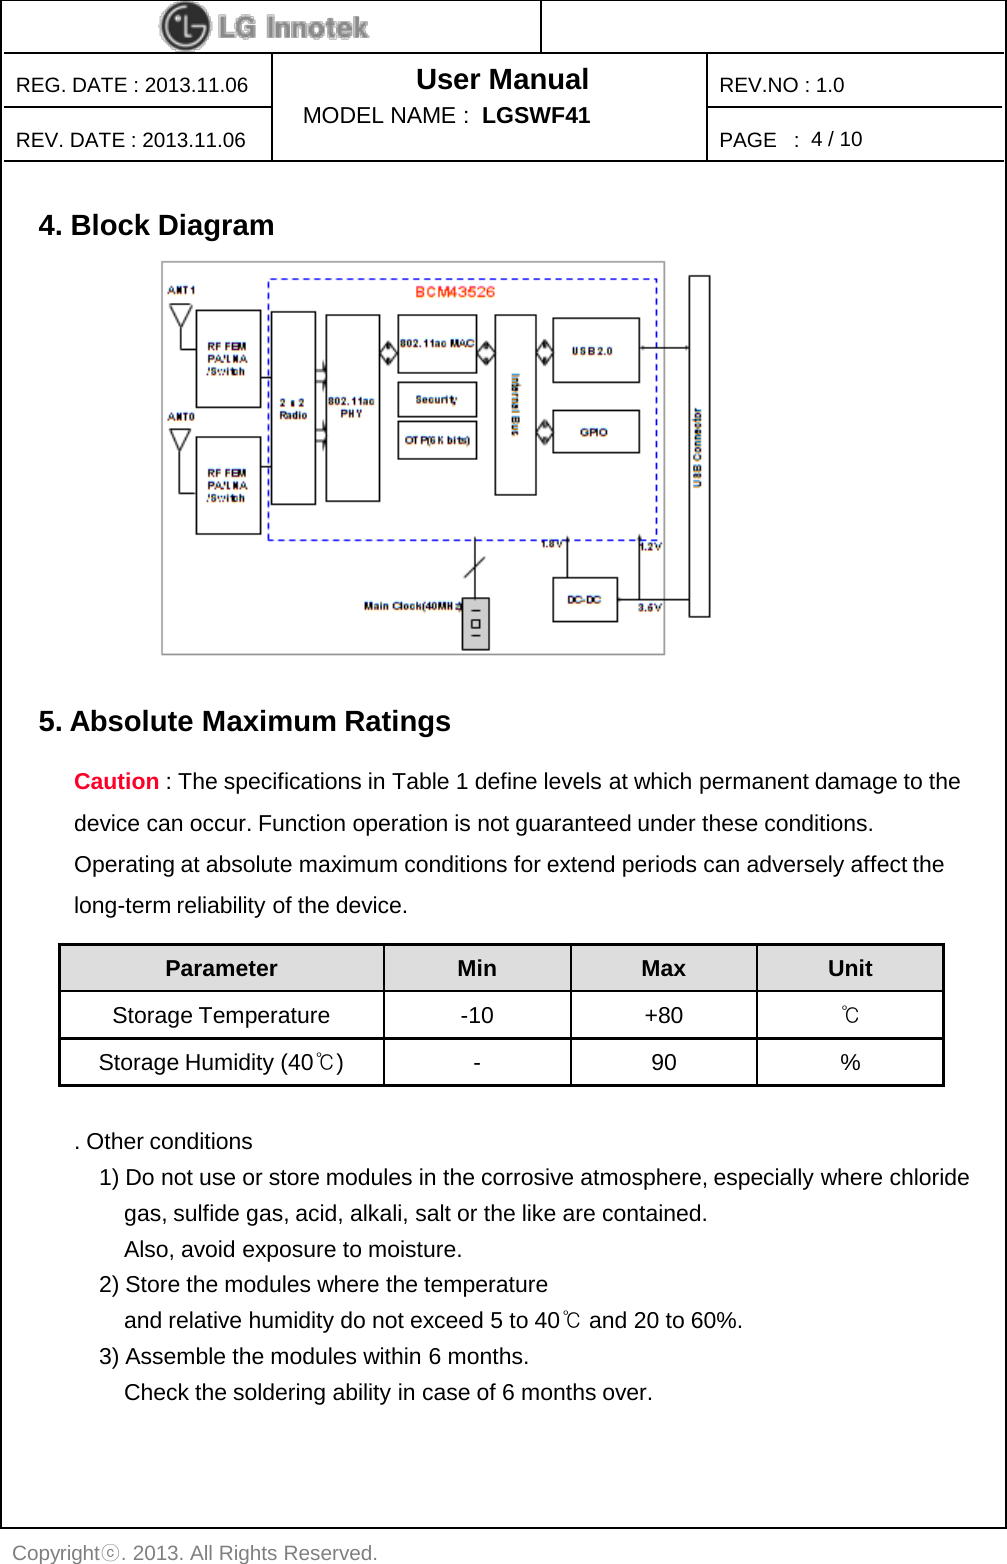 User Manual PAGE   : REG. DATE : 2013.11.06 REV. DATE : 2013.11.06 REV.NO : 1.0 Copyrightⓒ. 2013. All Rights Reserved. MODEL NAME :  LGSWF41 4 / 10 5. Absolute Maximum Ratings    Parameter Min Max Unit Storage Temperature  -10 +80 ℃ Storage Humidity (40℃)  -  90  % Caution : The specifications in Table 1 define levels at which permanent damage to the device can occur. Function operation is not guaranteed under these conditions. Operating at absolute maximum conditions for extend periods can adversely affect the long-term reliability of the device. 4. Block Diagram    . Other conditions     1) Do not use or store modules in the corrosive atmosphere, especially where chloride         gas, sulfide gas, acid, alkali, salt or the like are contained.          Also, avoid exposure to moisture.      2) Store the modules where the temperature         and relative humidity do not exceed 5 to 40℃ and 20 to 60%.     3) Assemble the modules within 6 months.         Check the soldering ability in case of 6 months over. 